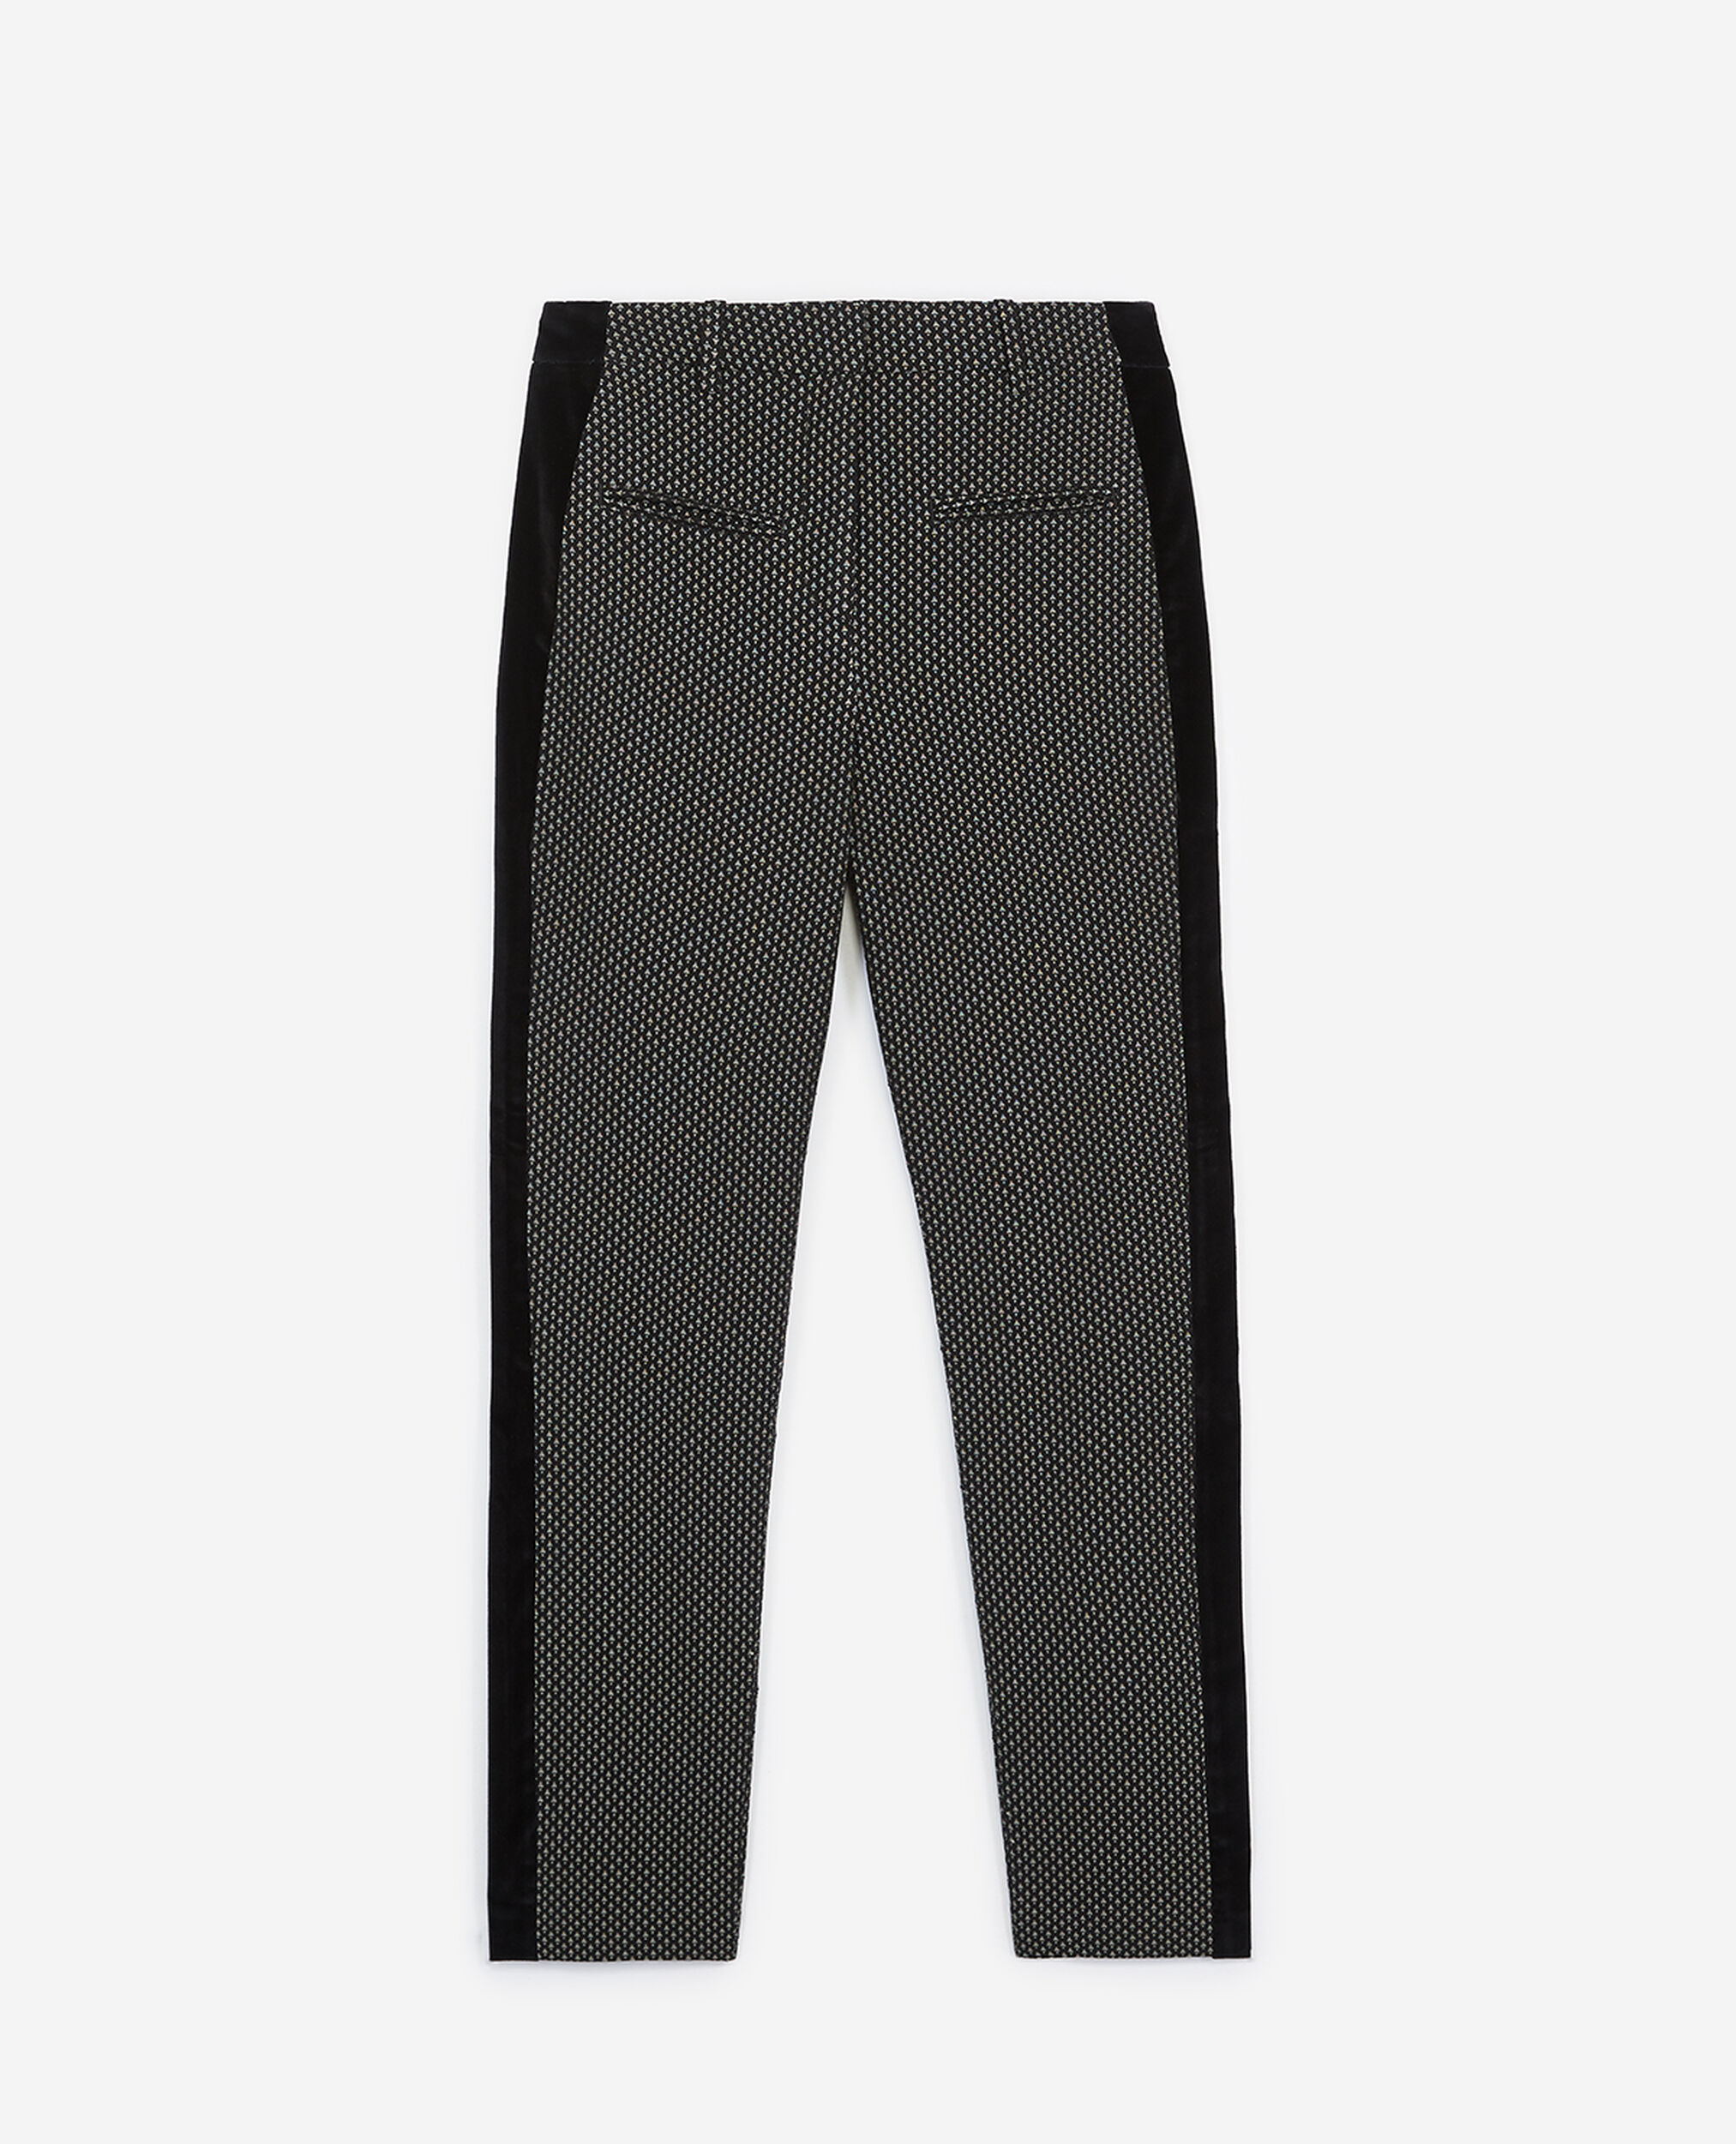 Flowing trousers with print, graphic, BLACK-ECRU, hi-res image number null